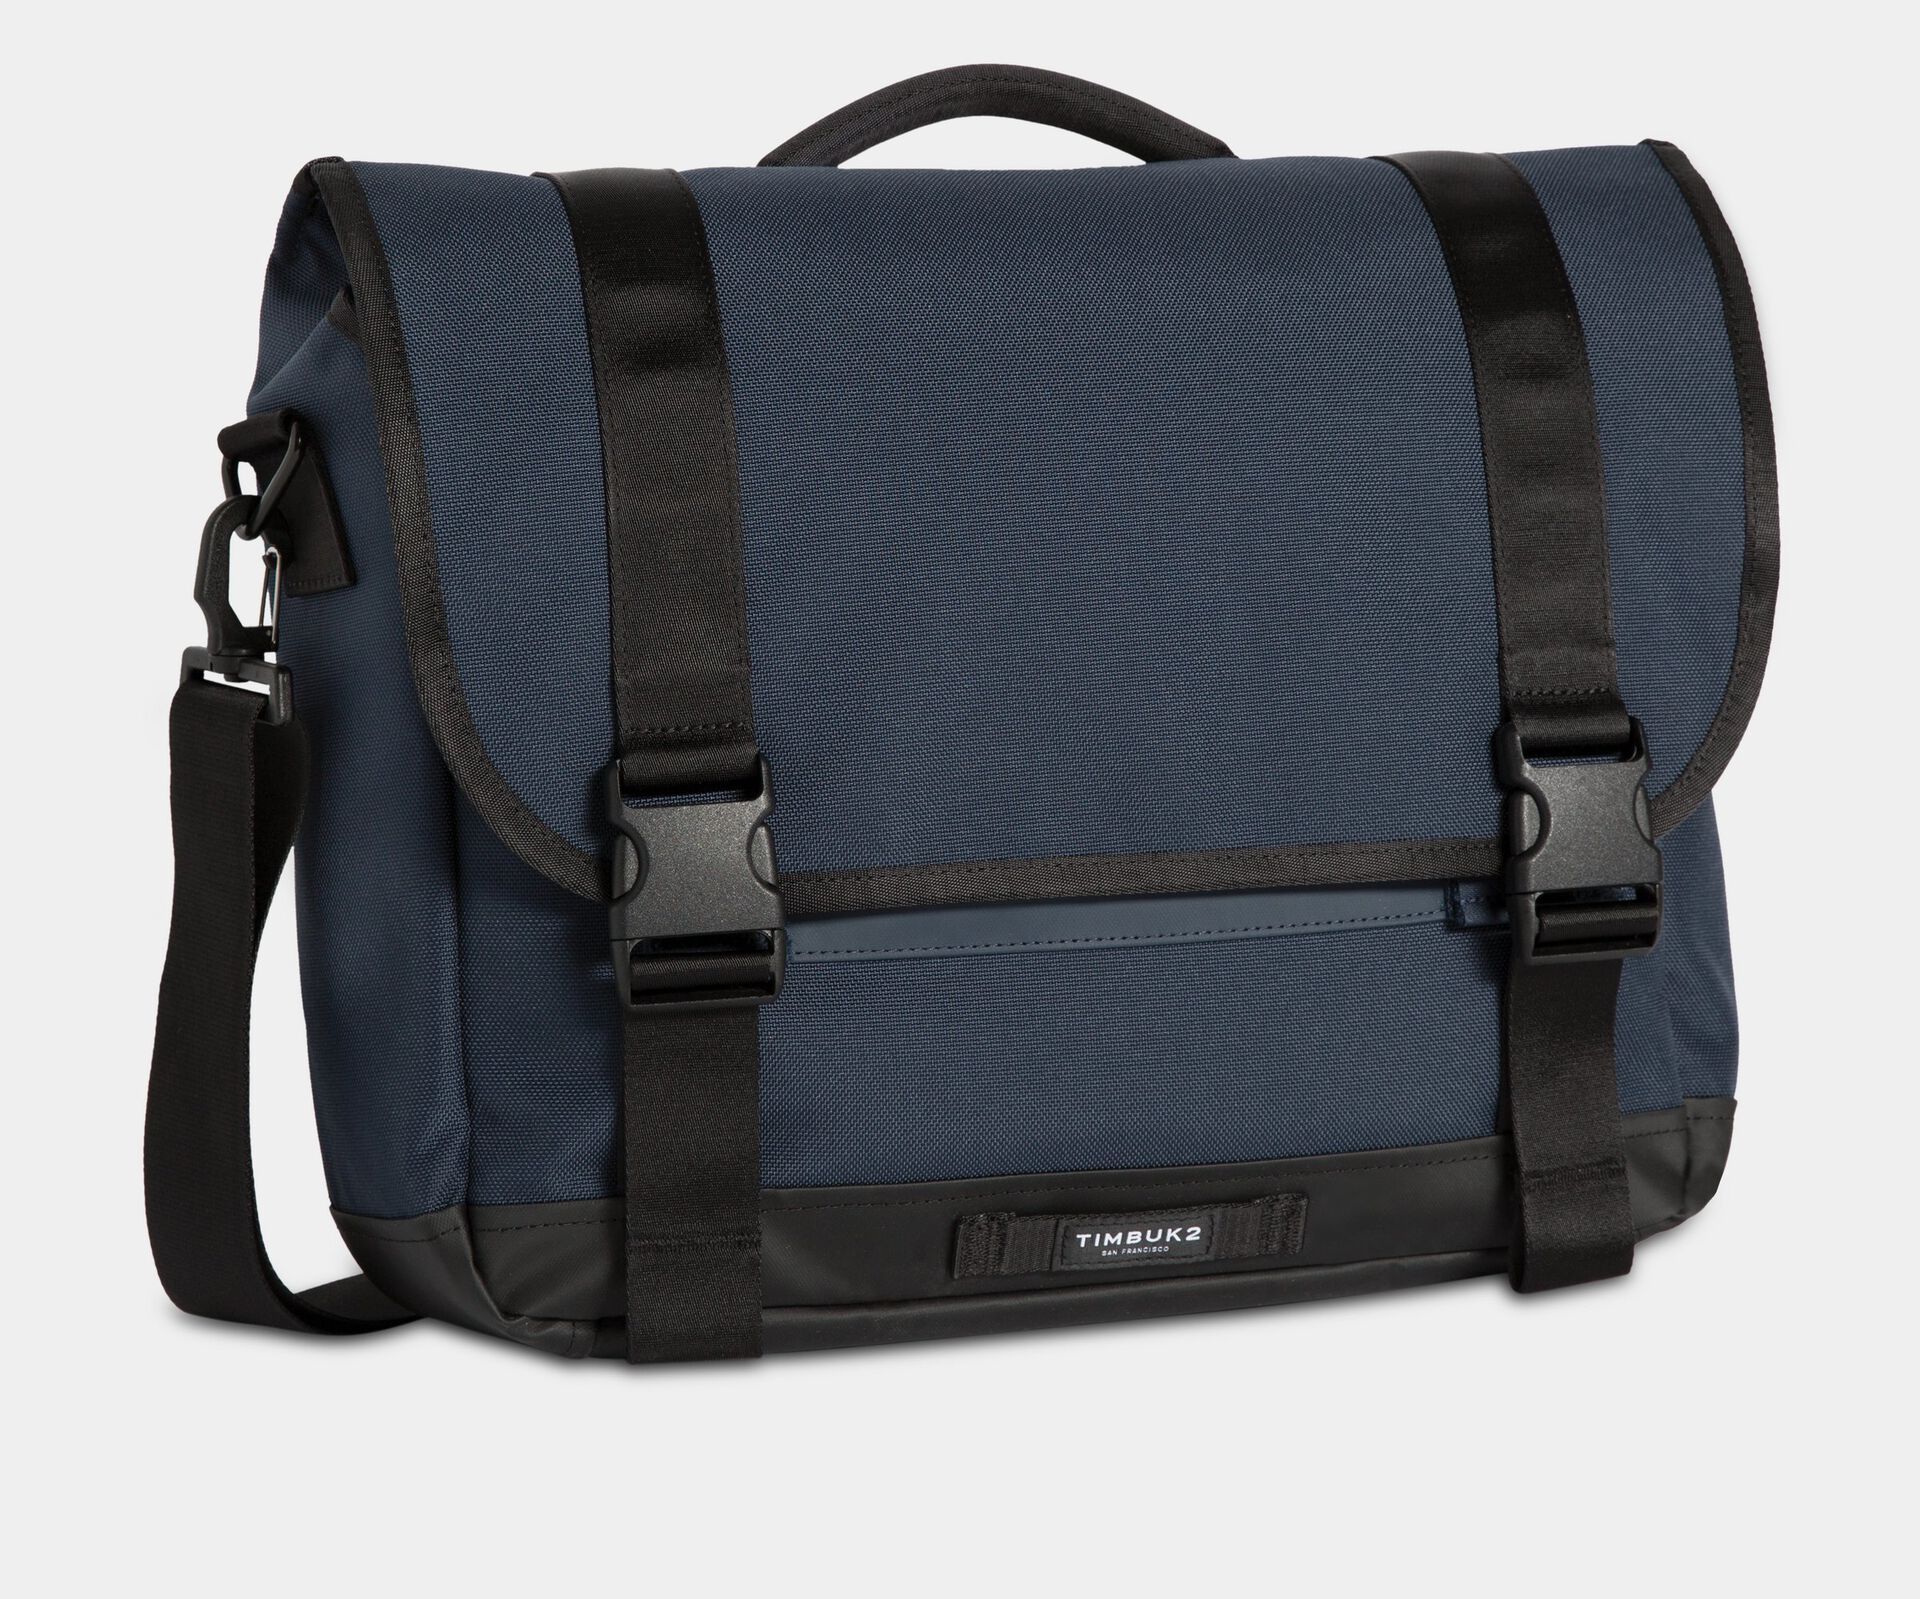 Shop Our Newly Released Bags | Timbuk2